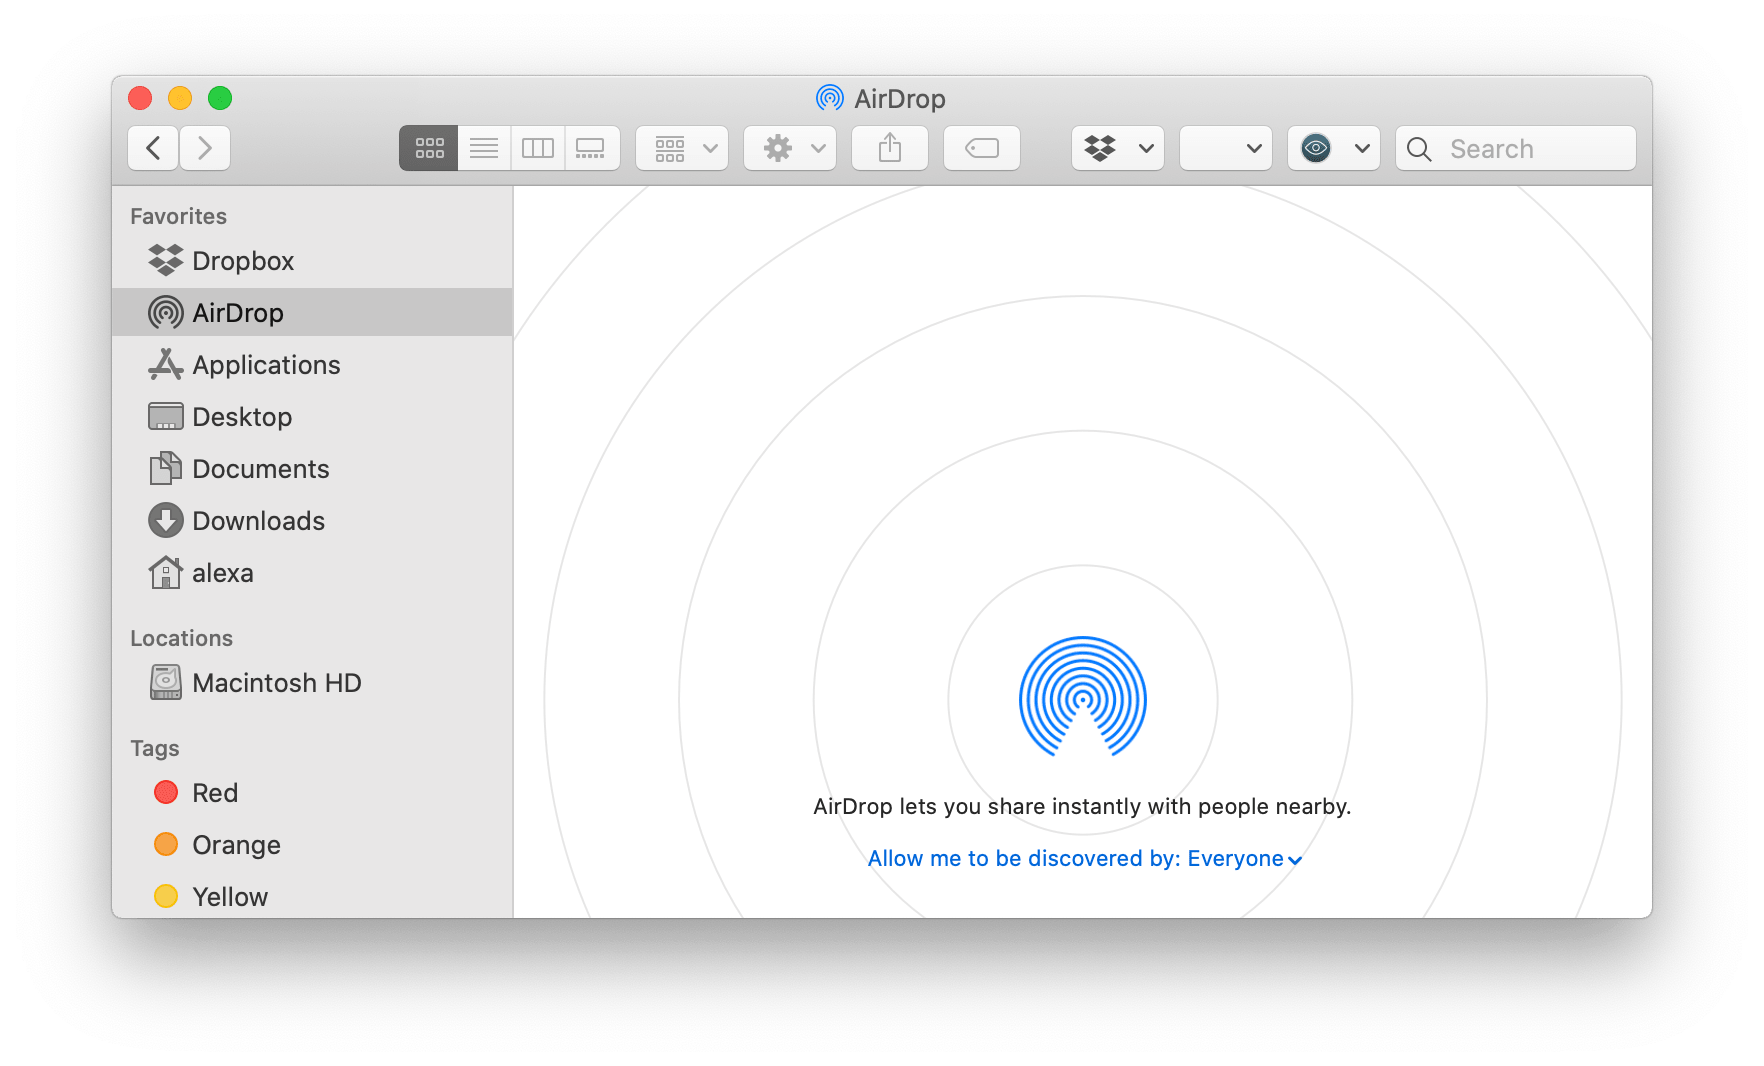 How to AirDrop on Mac - Turn On and AirDrop Photos | Nektony